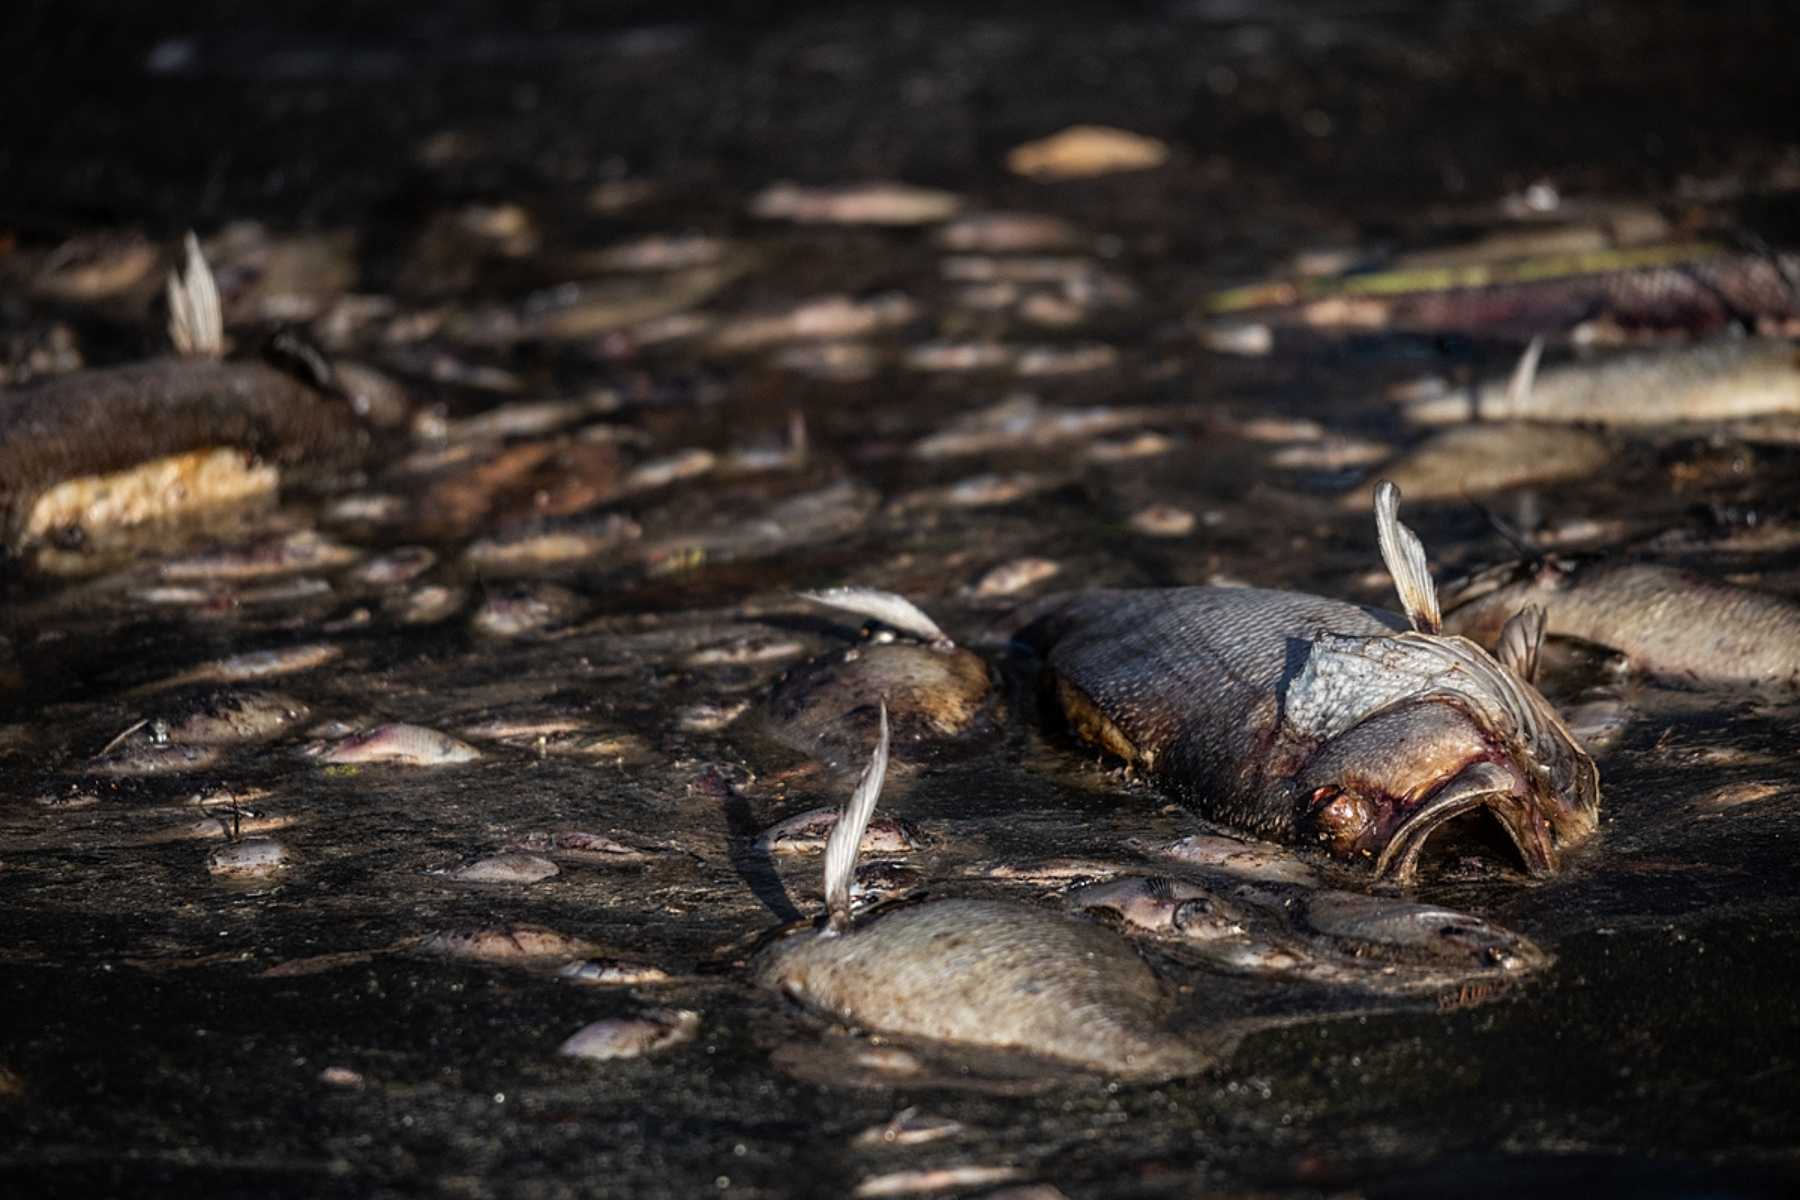 Dead fish floating in flood waters after Hurricane Florence in North Carolina.